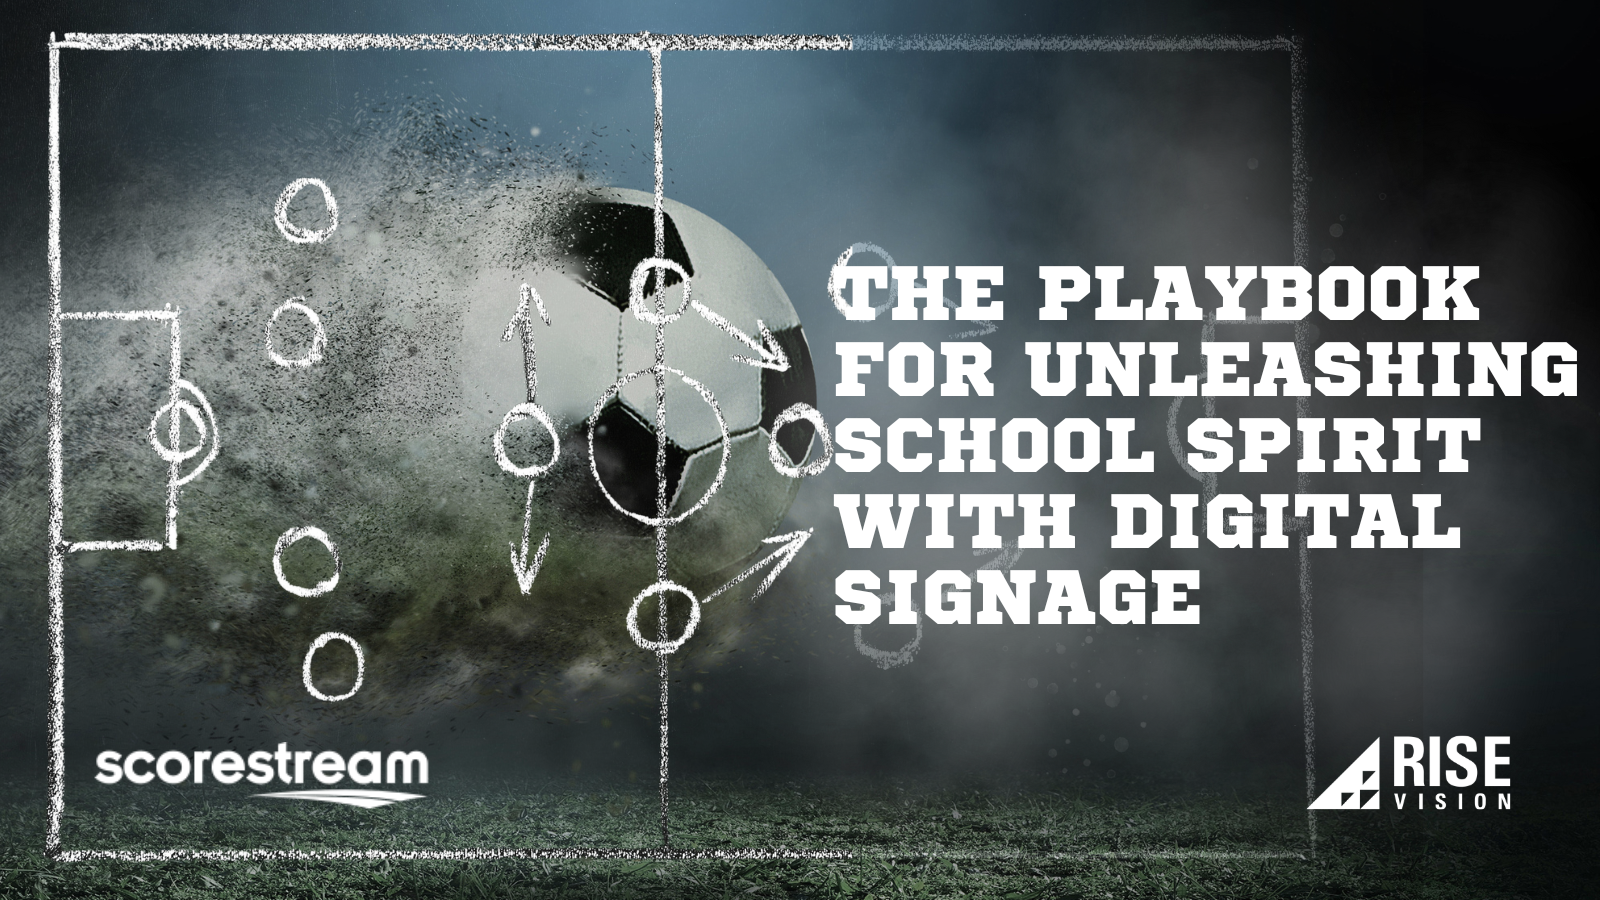 The Playbook for Unleashing School Spirit with Digital Signage